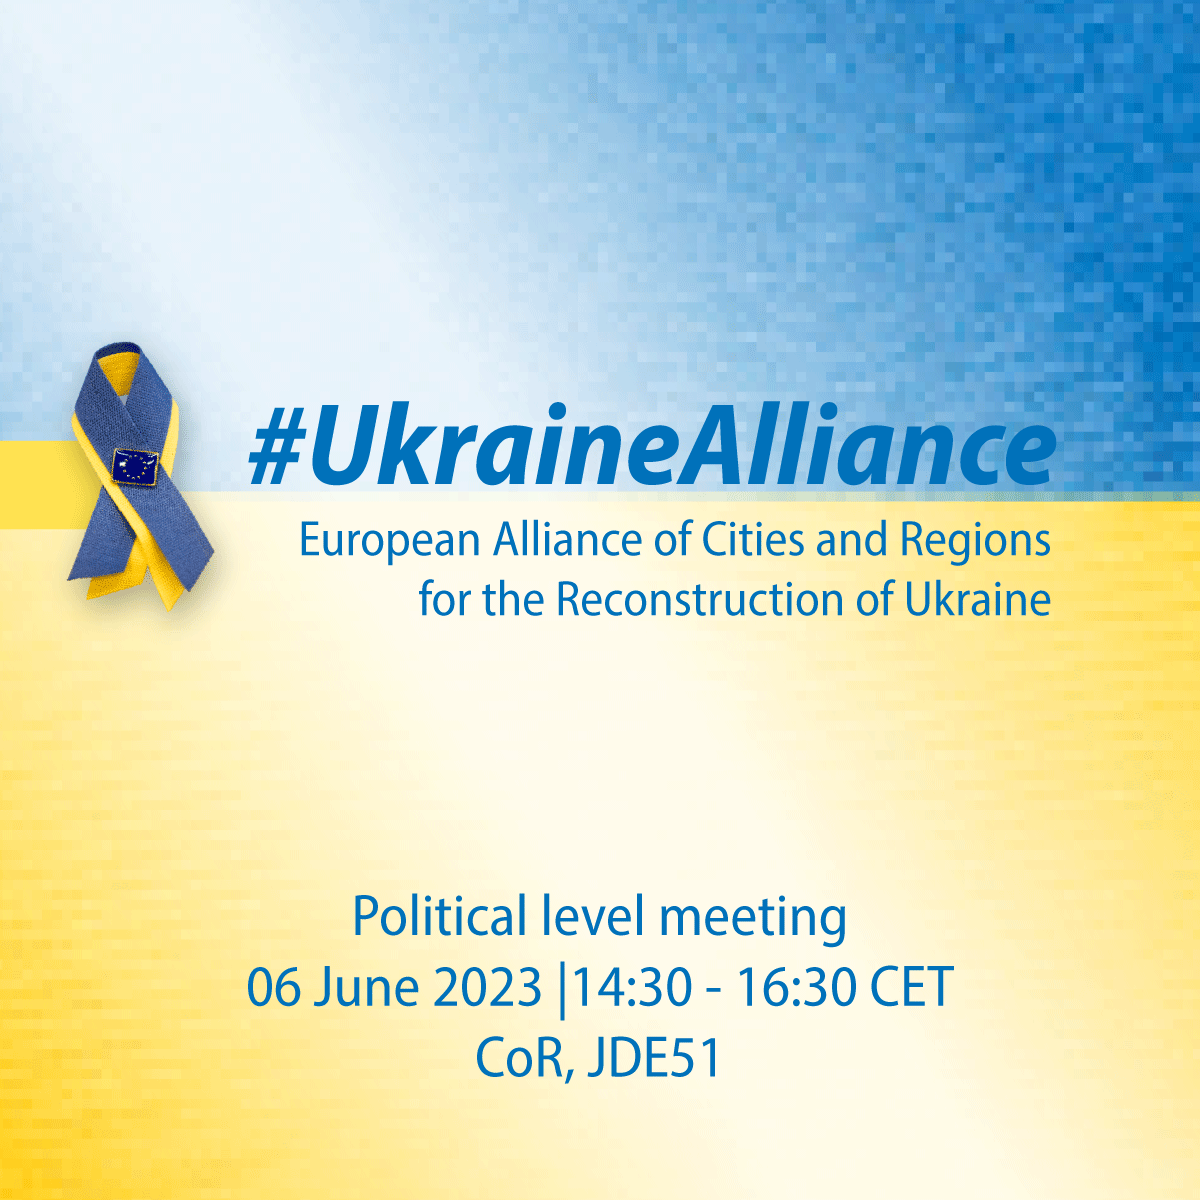 🇺🇦 🇪🇺 The CoR will host today a #UkraineAlliance political meeting.

The event will provide the Alliance's political leadership with a platform to debate the strategic outlook for Ukraine's reconstruction and recovery process.

📍 CoR
⏲ 14:30 - 16:30 (CET)

#StandWithUkraine